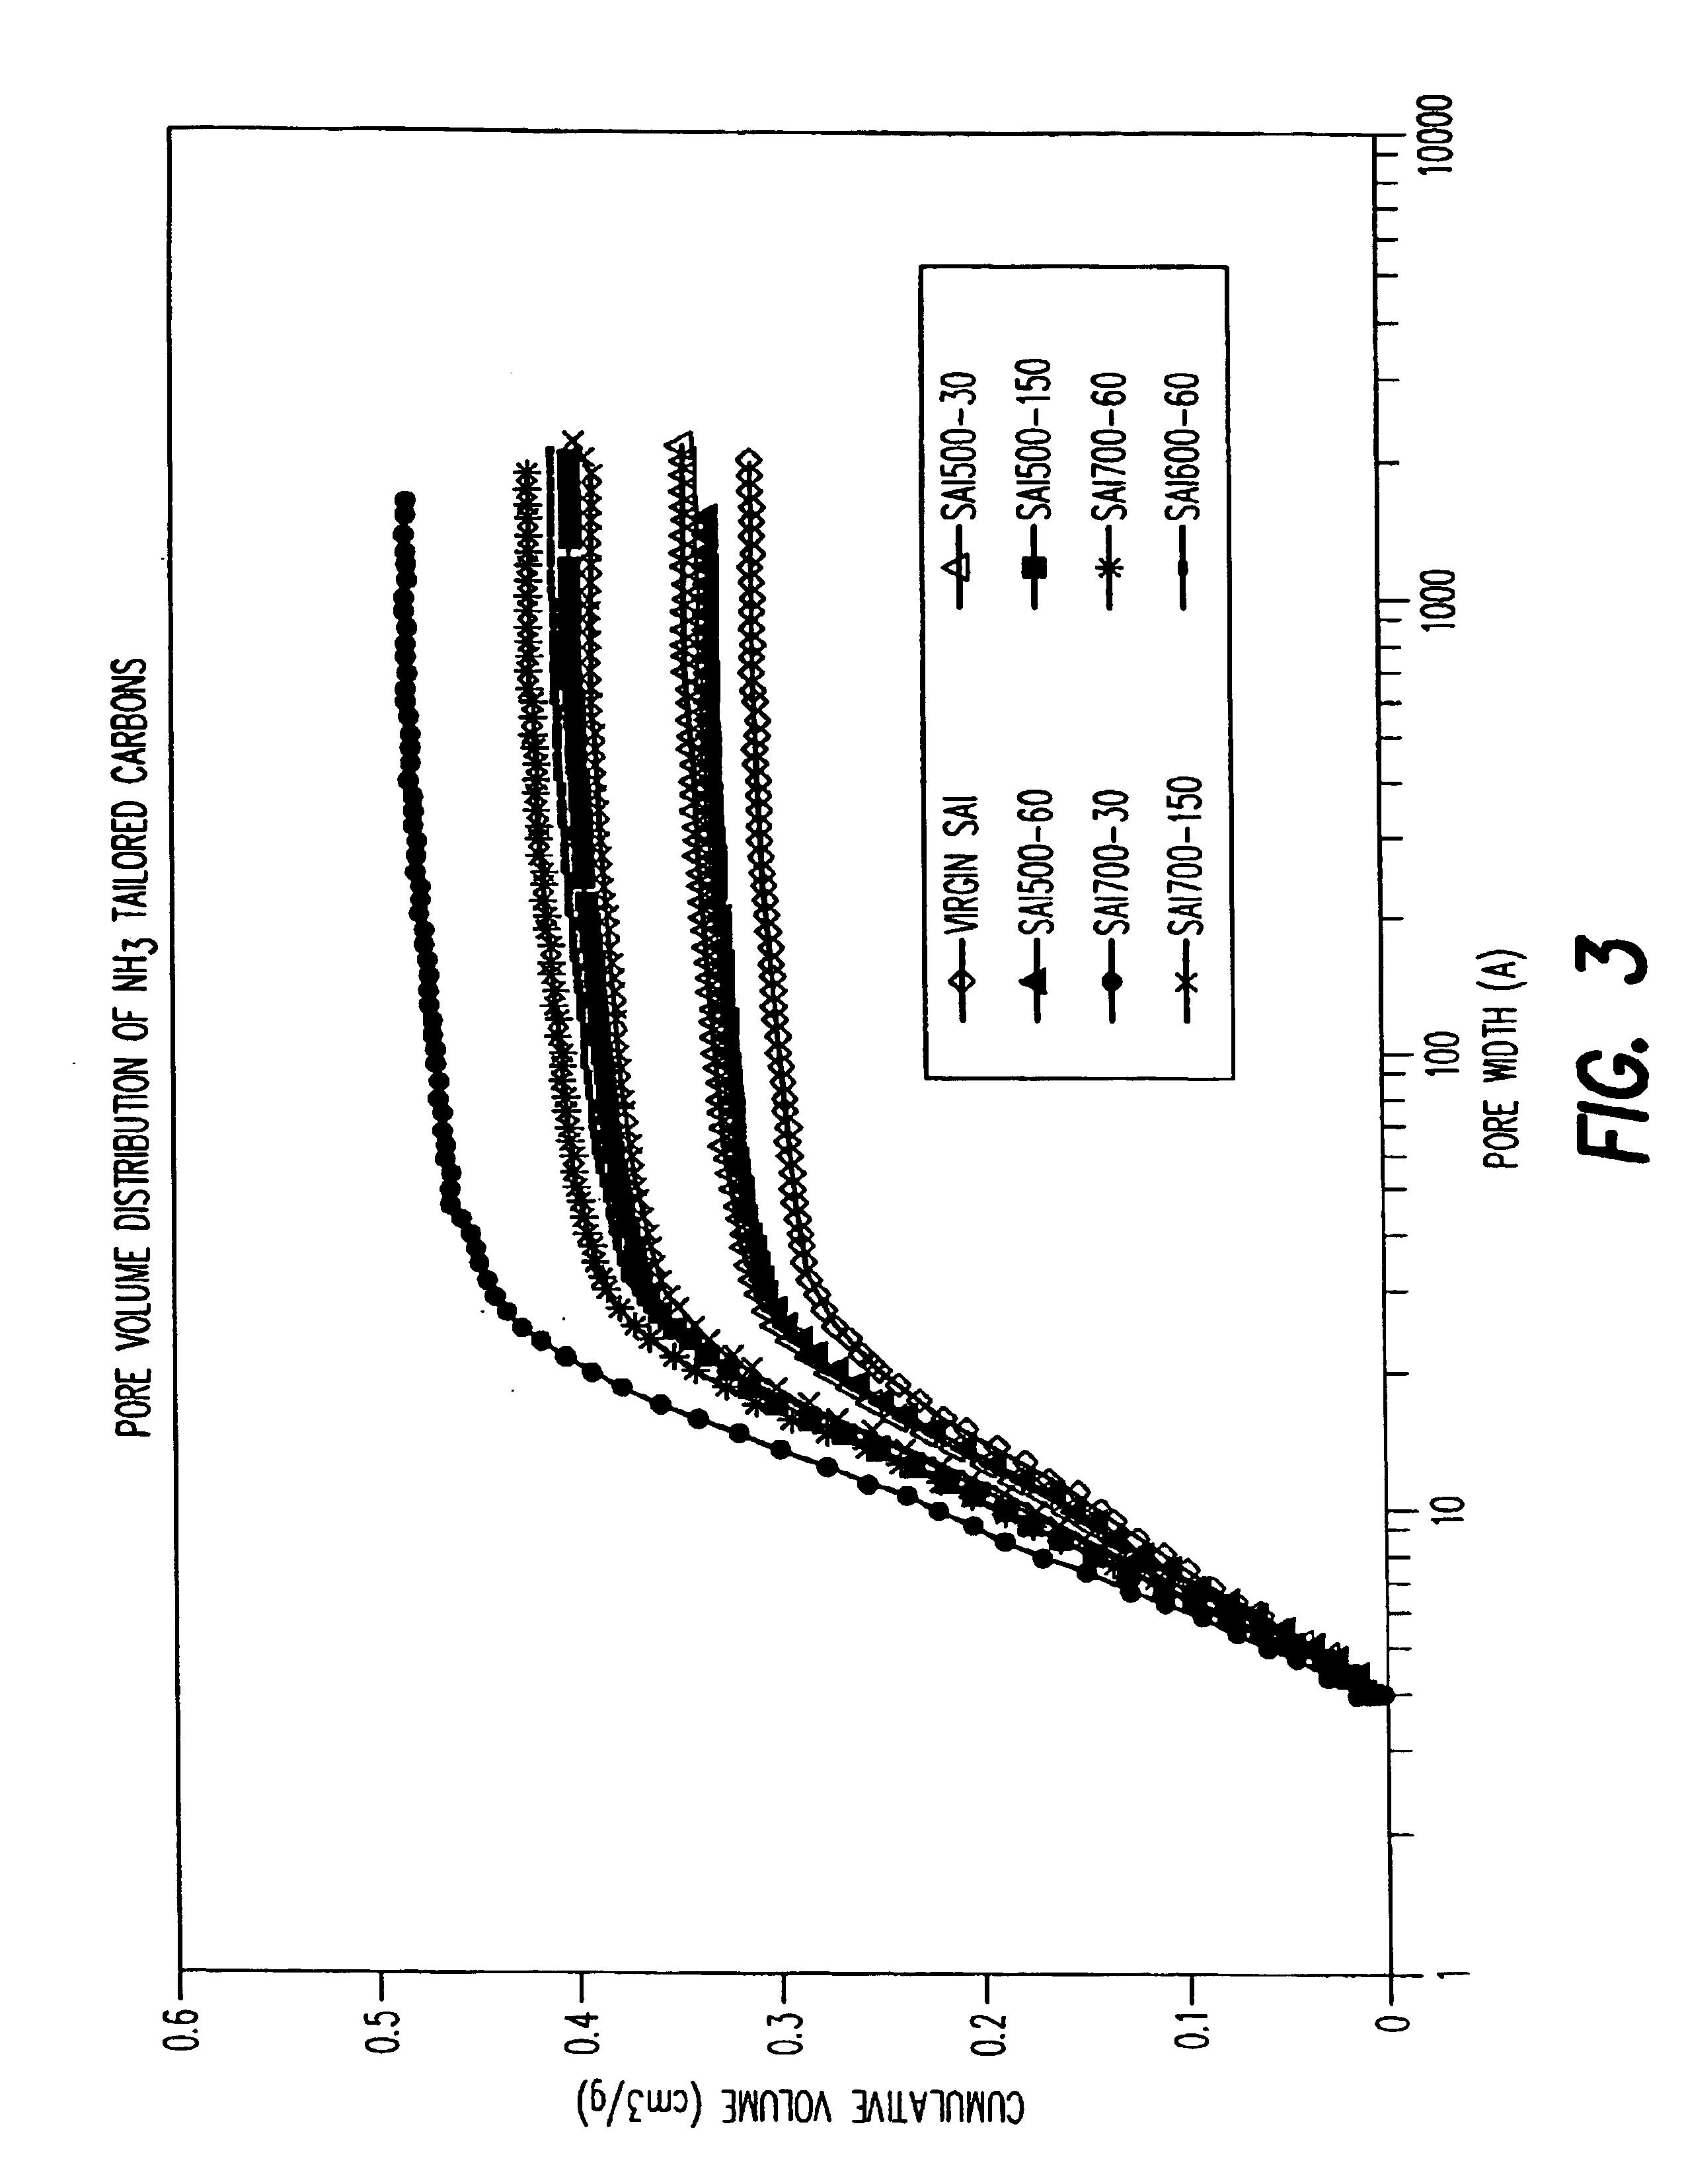 Method for perchlorate removal from ground water